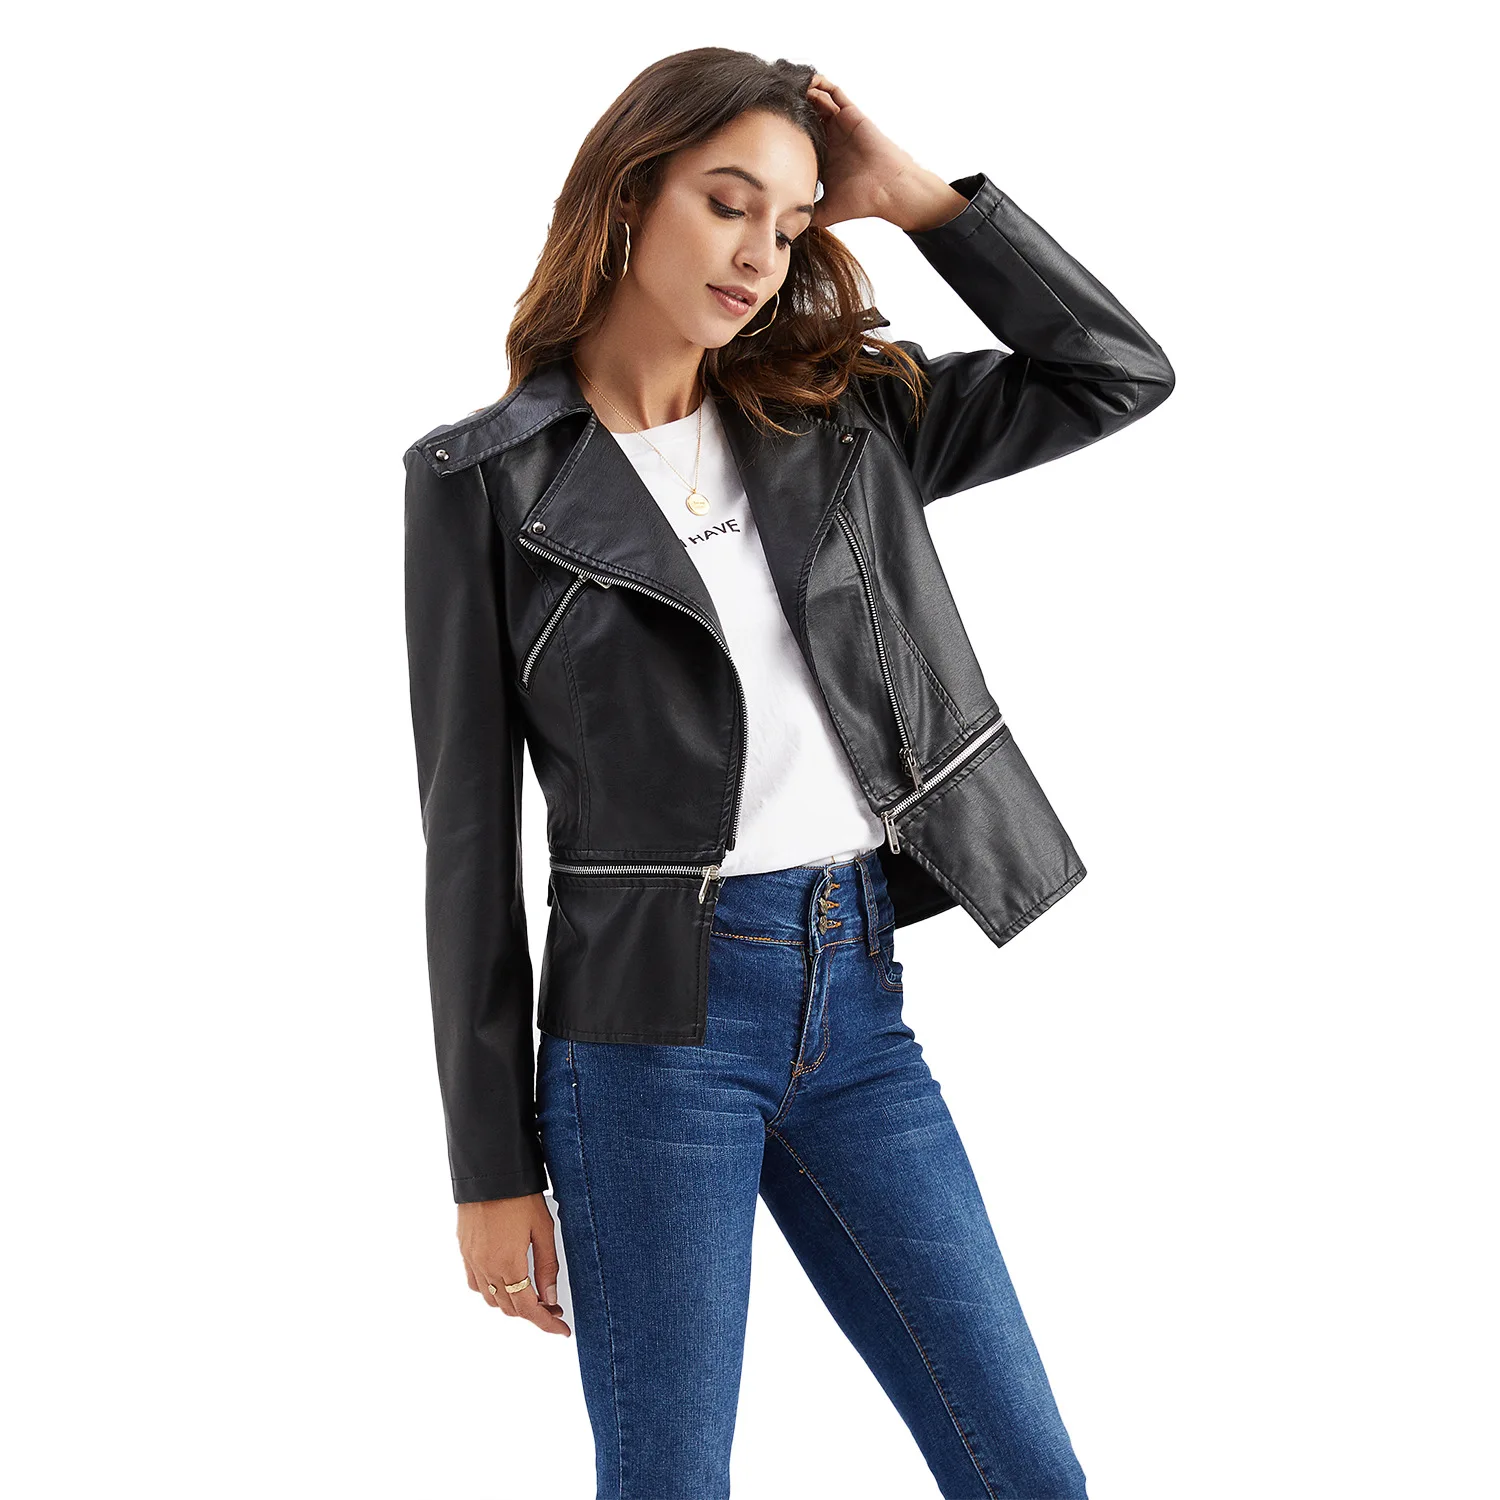 Women's Leisure Hem Detachable Leather Jacket, Spring and Autumn Coat, European and American Fashion, High-Quality Lapel Zipper, european and american style spring and autumn new fashion sexy back zipper hooded long sleeve sports leisure two piece set